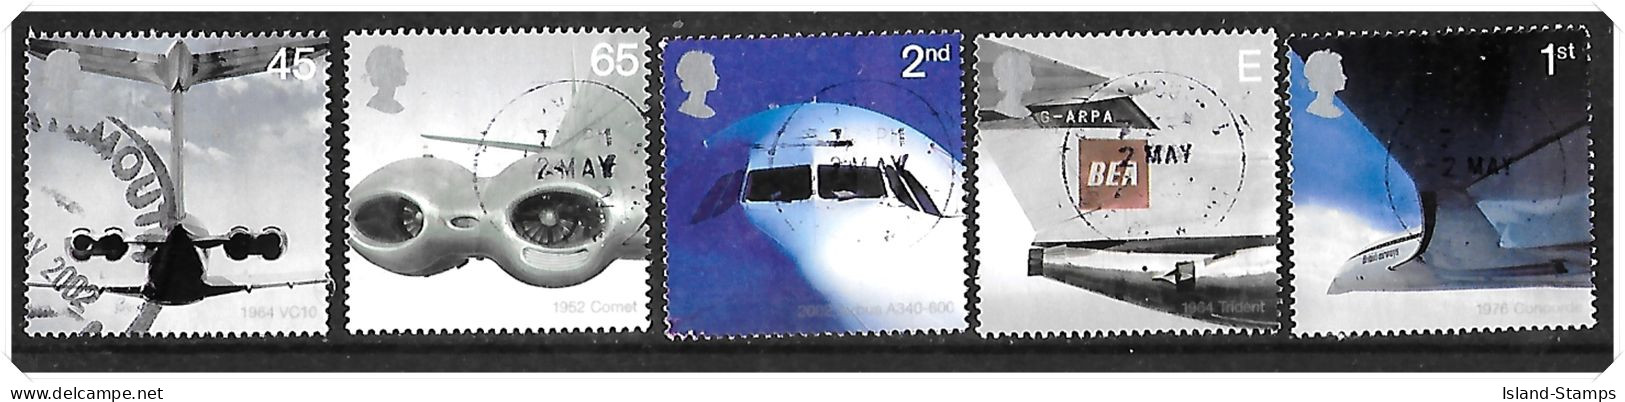 2002 Airliners Used Set HRD2-C - Used Stamps